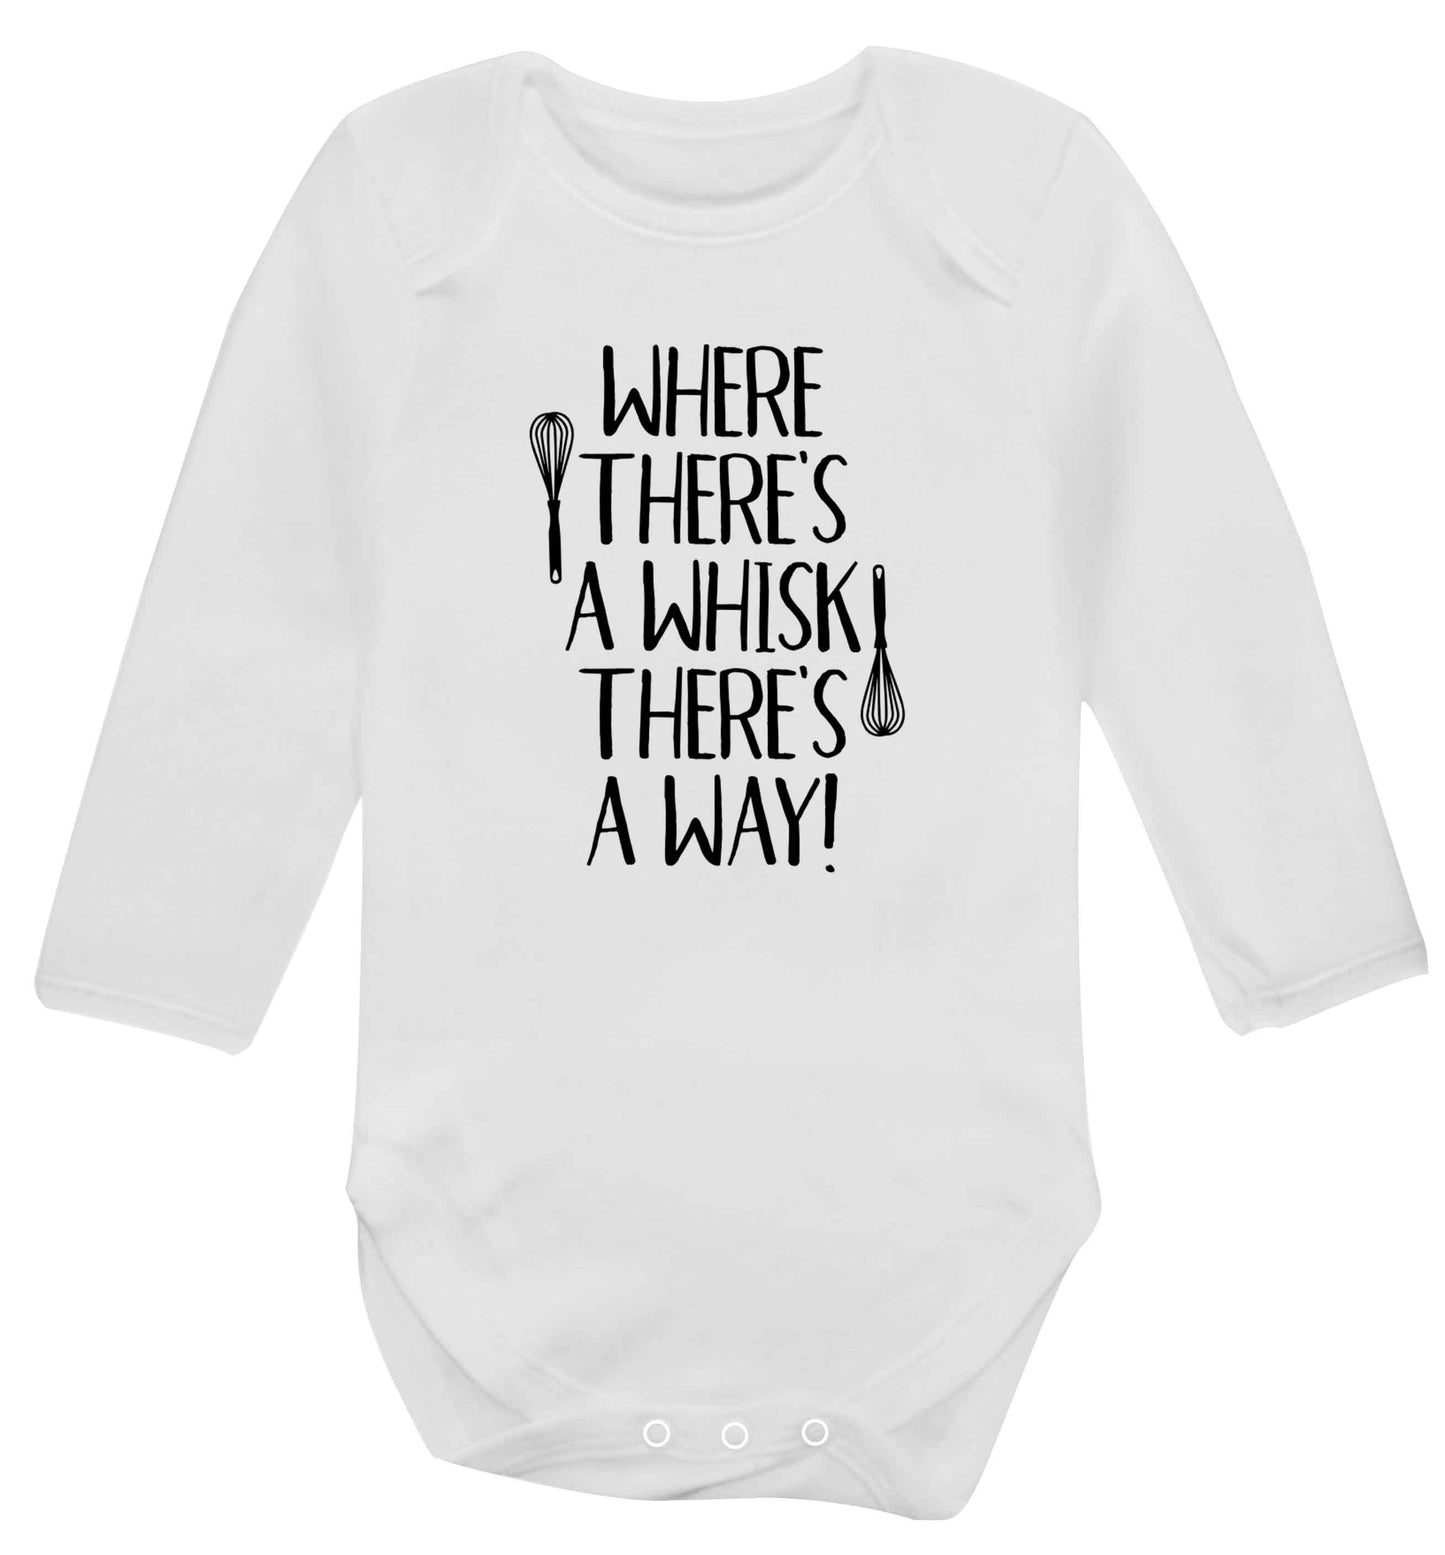 Where there's a whisk there's a way Baby Vest long sleeved white 6-12 months